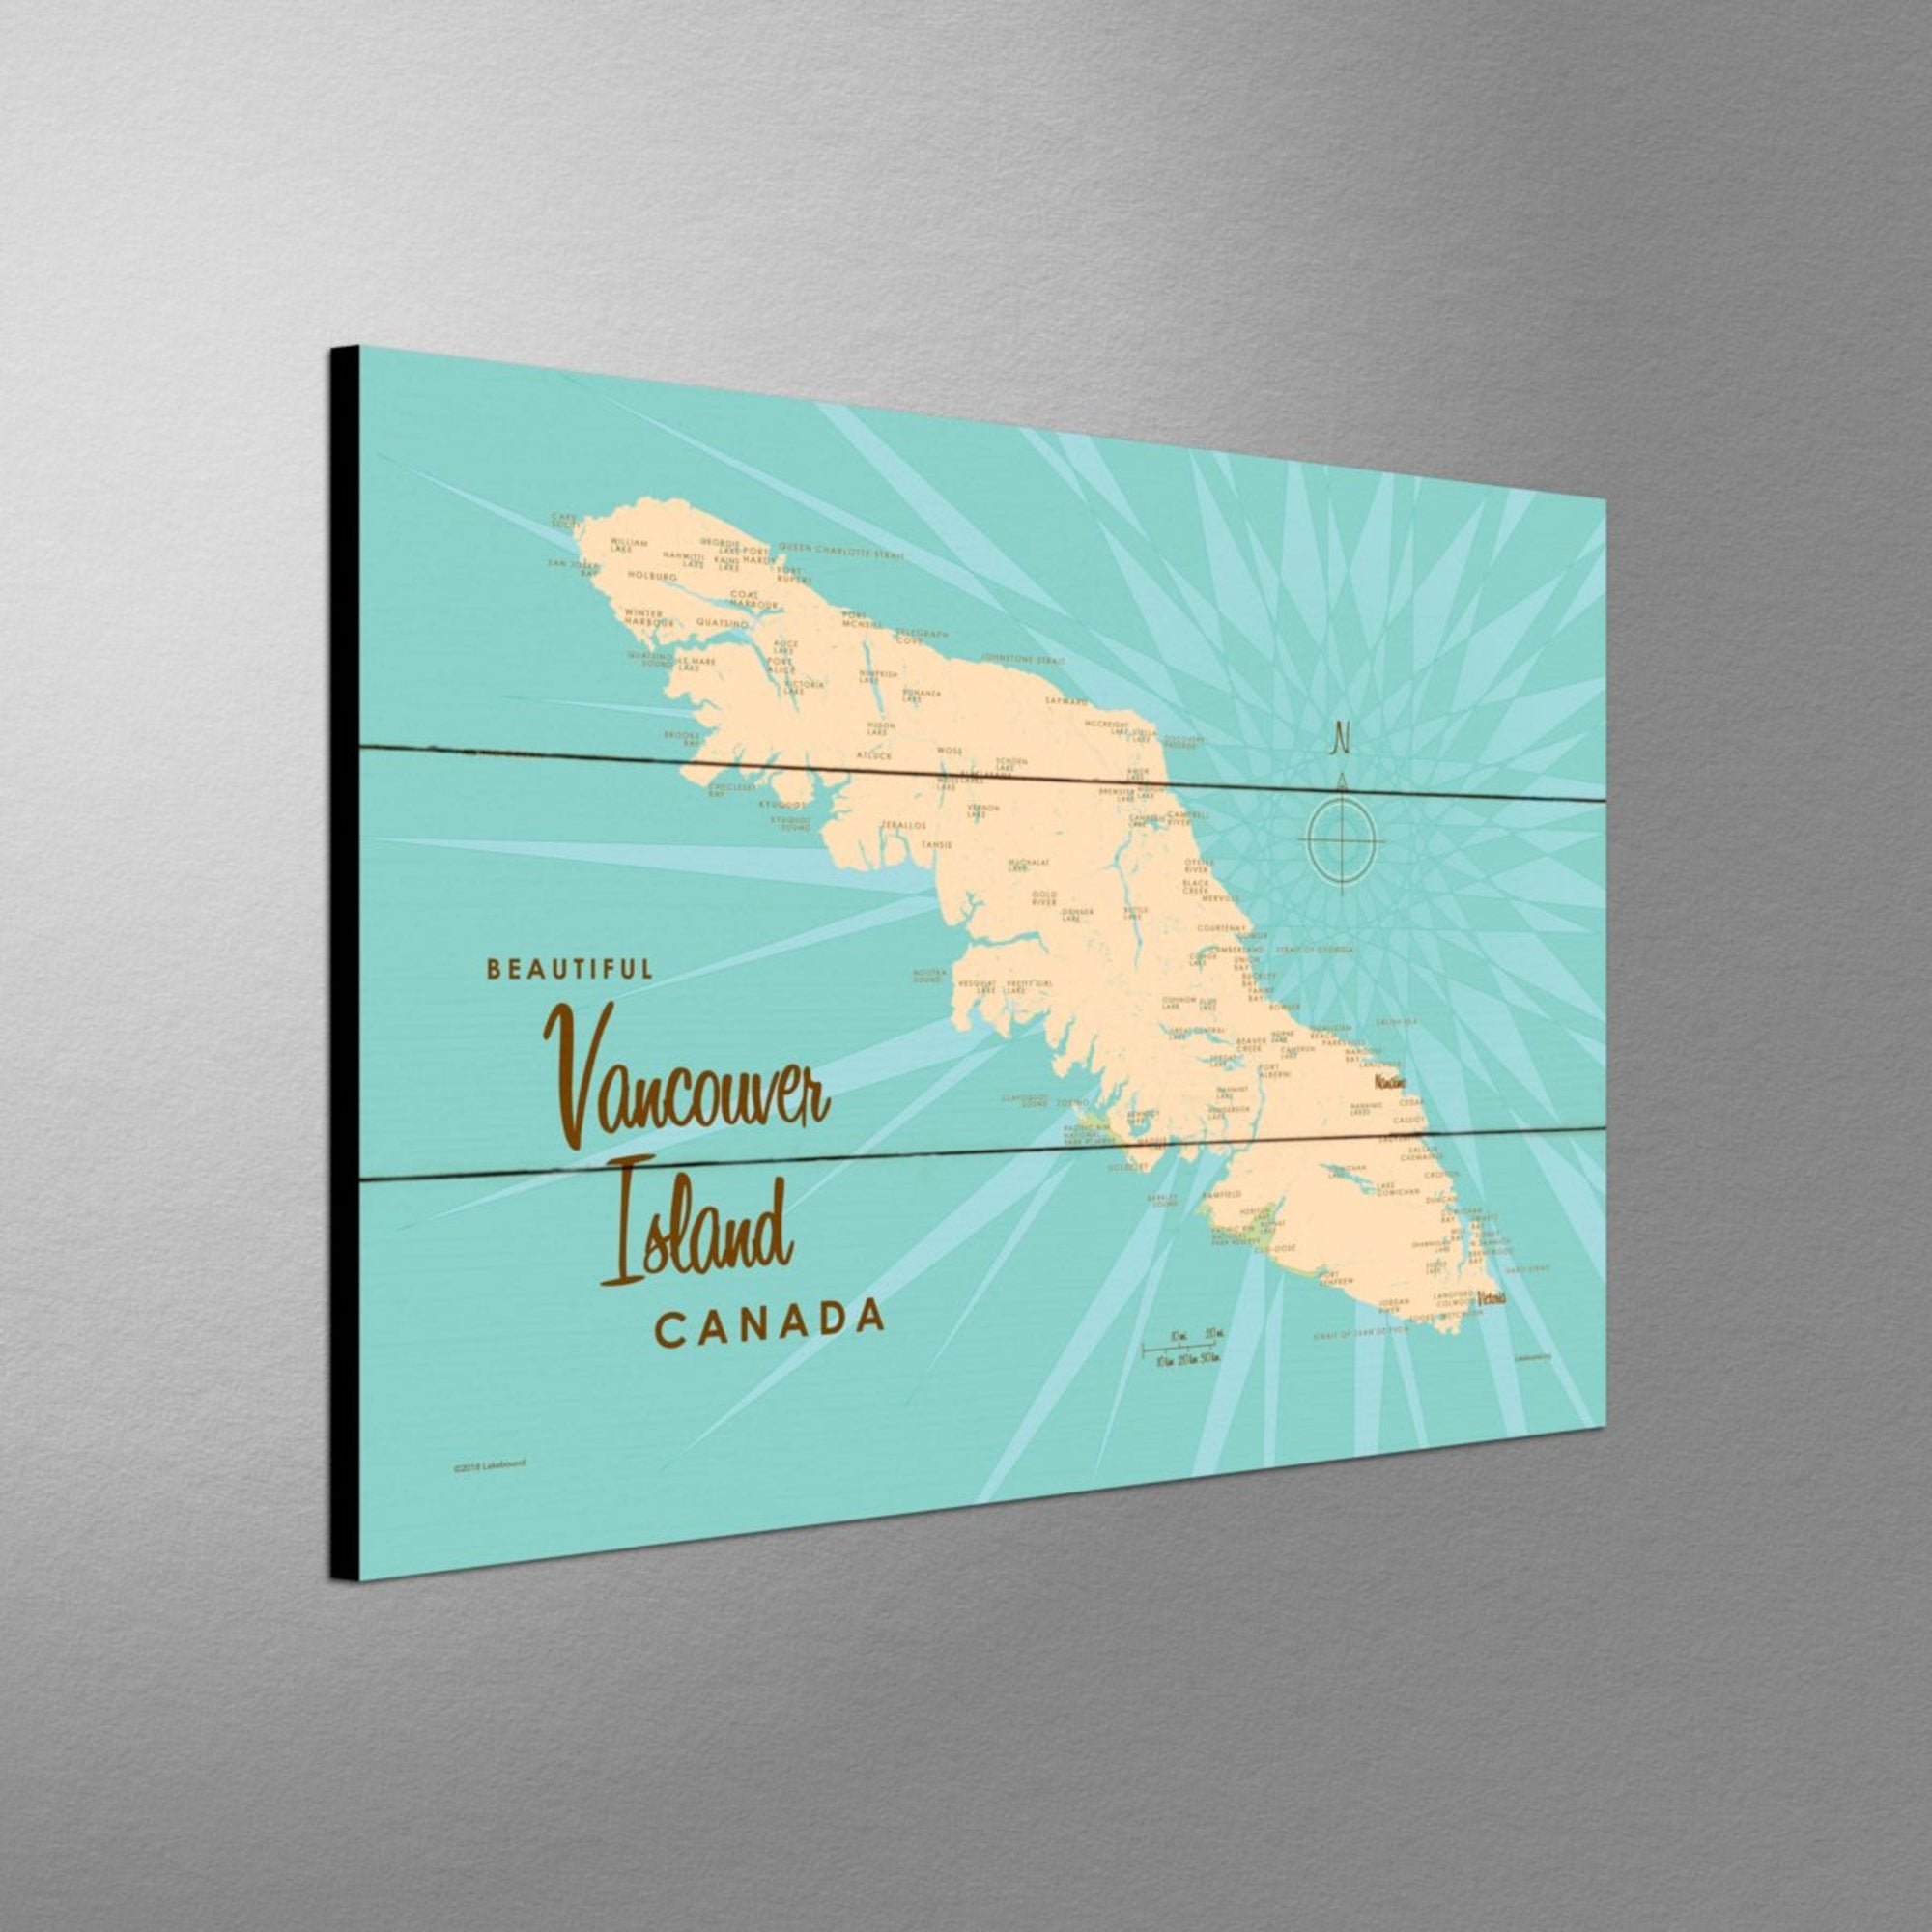 Vancouver Island, Canada, Wood Sign Map Art